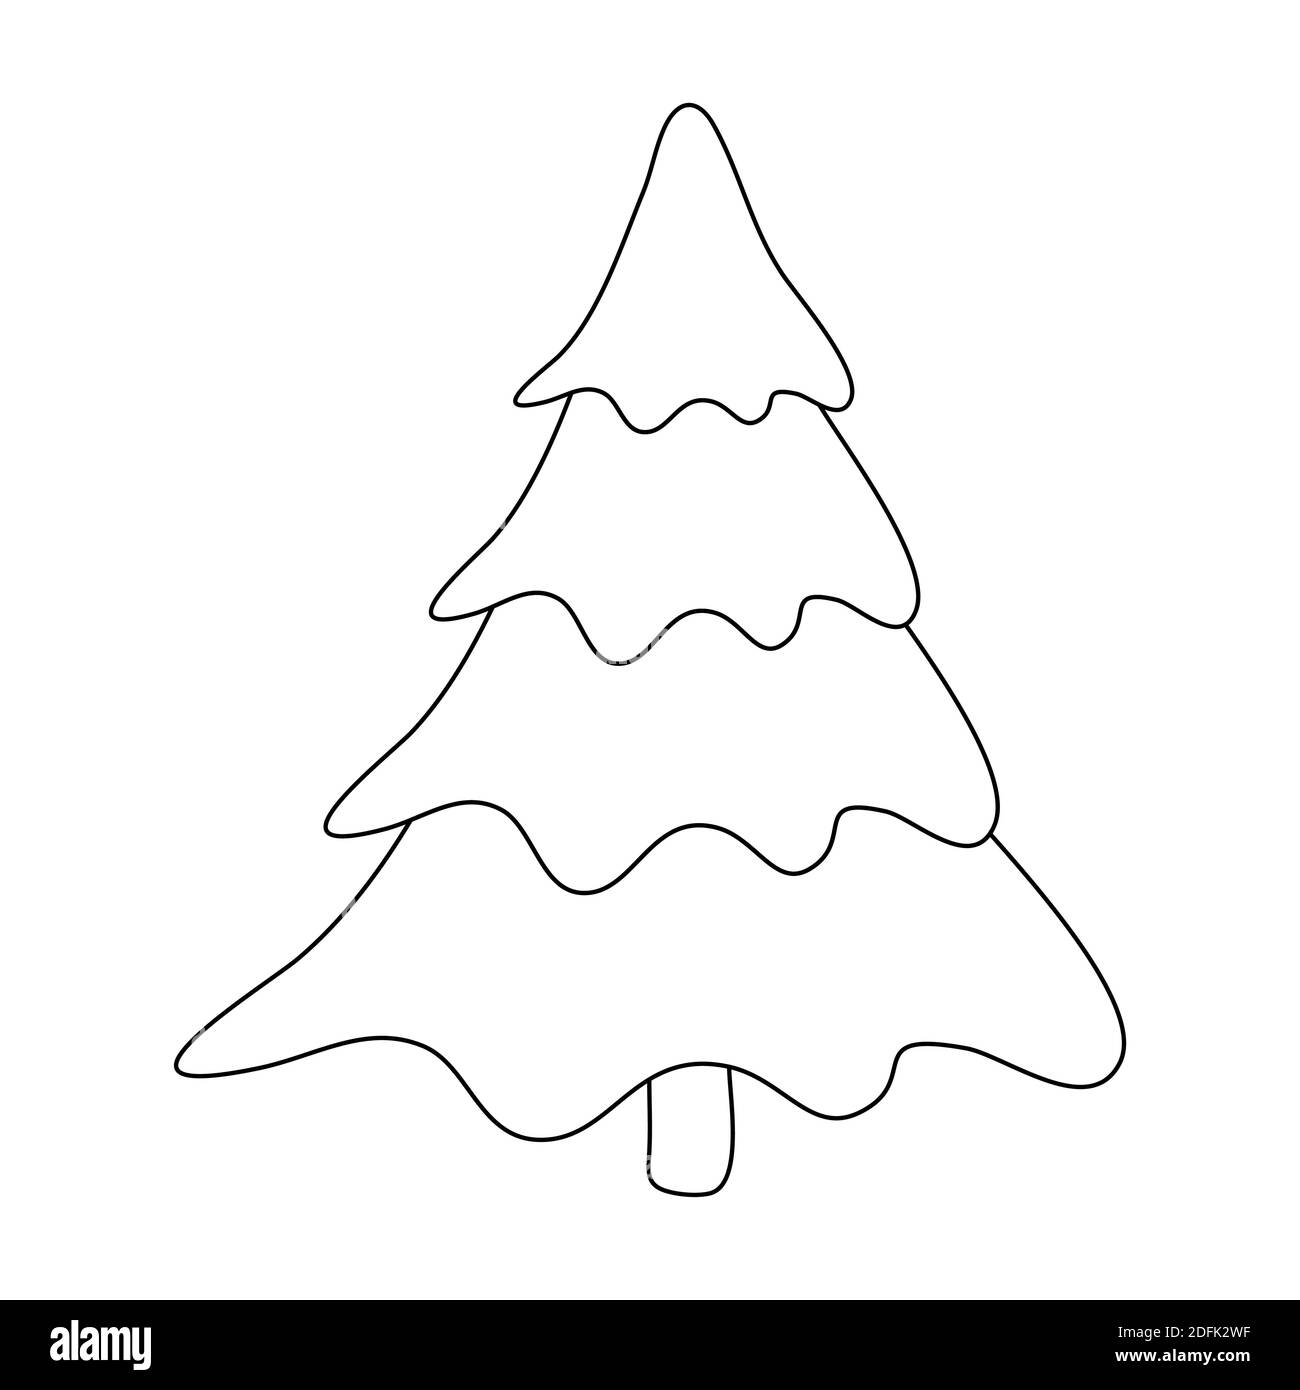 Christmas tree outline.  Contour of empty fir tree. Blank simple pine drawing design. December icon or symbol. Vector illustration isolated on white b Stock Vector